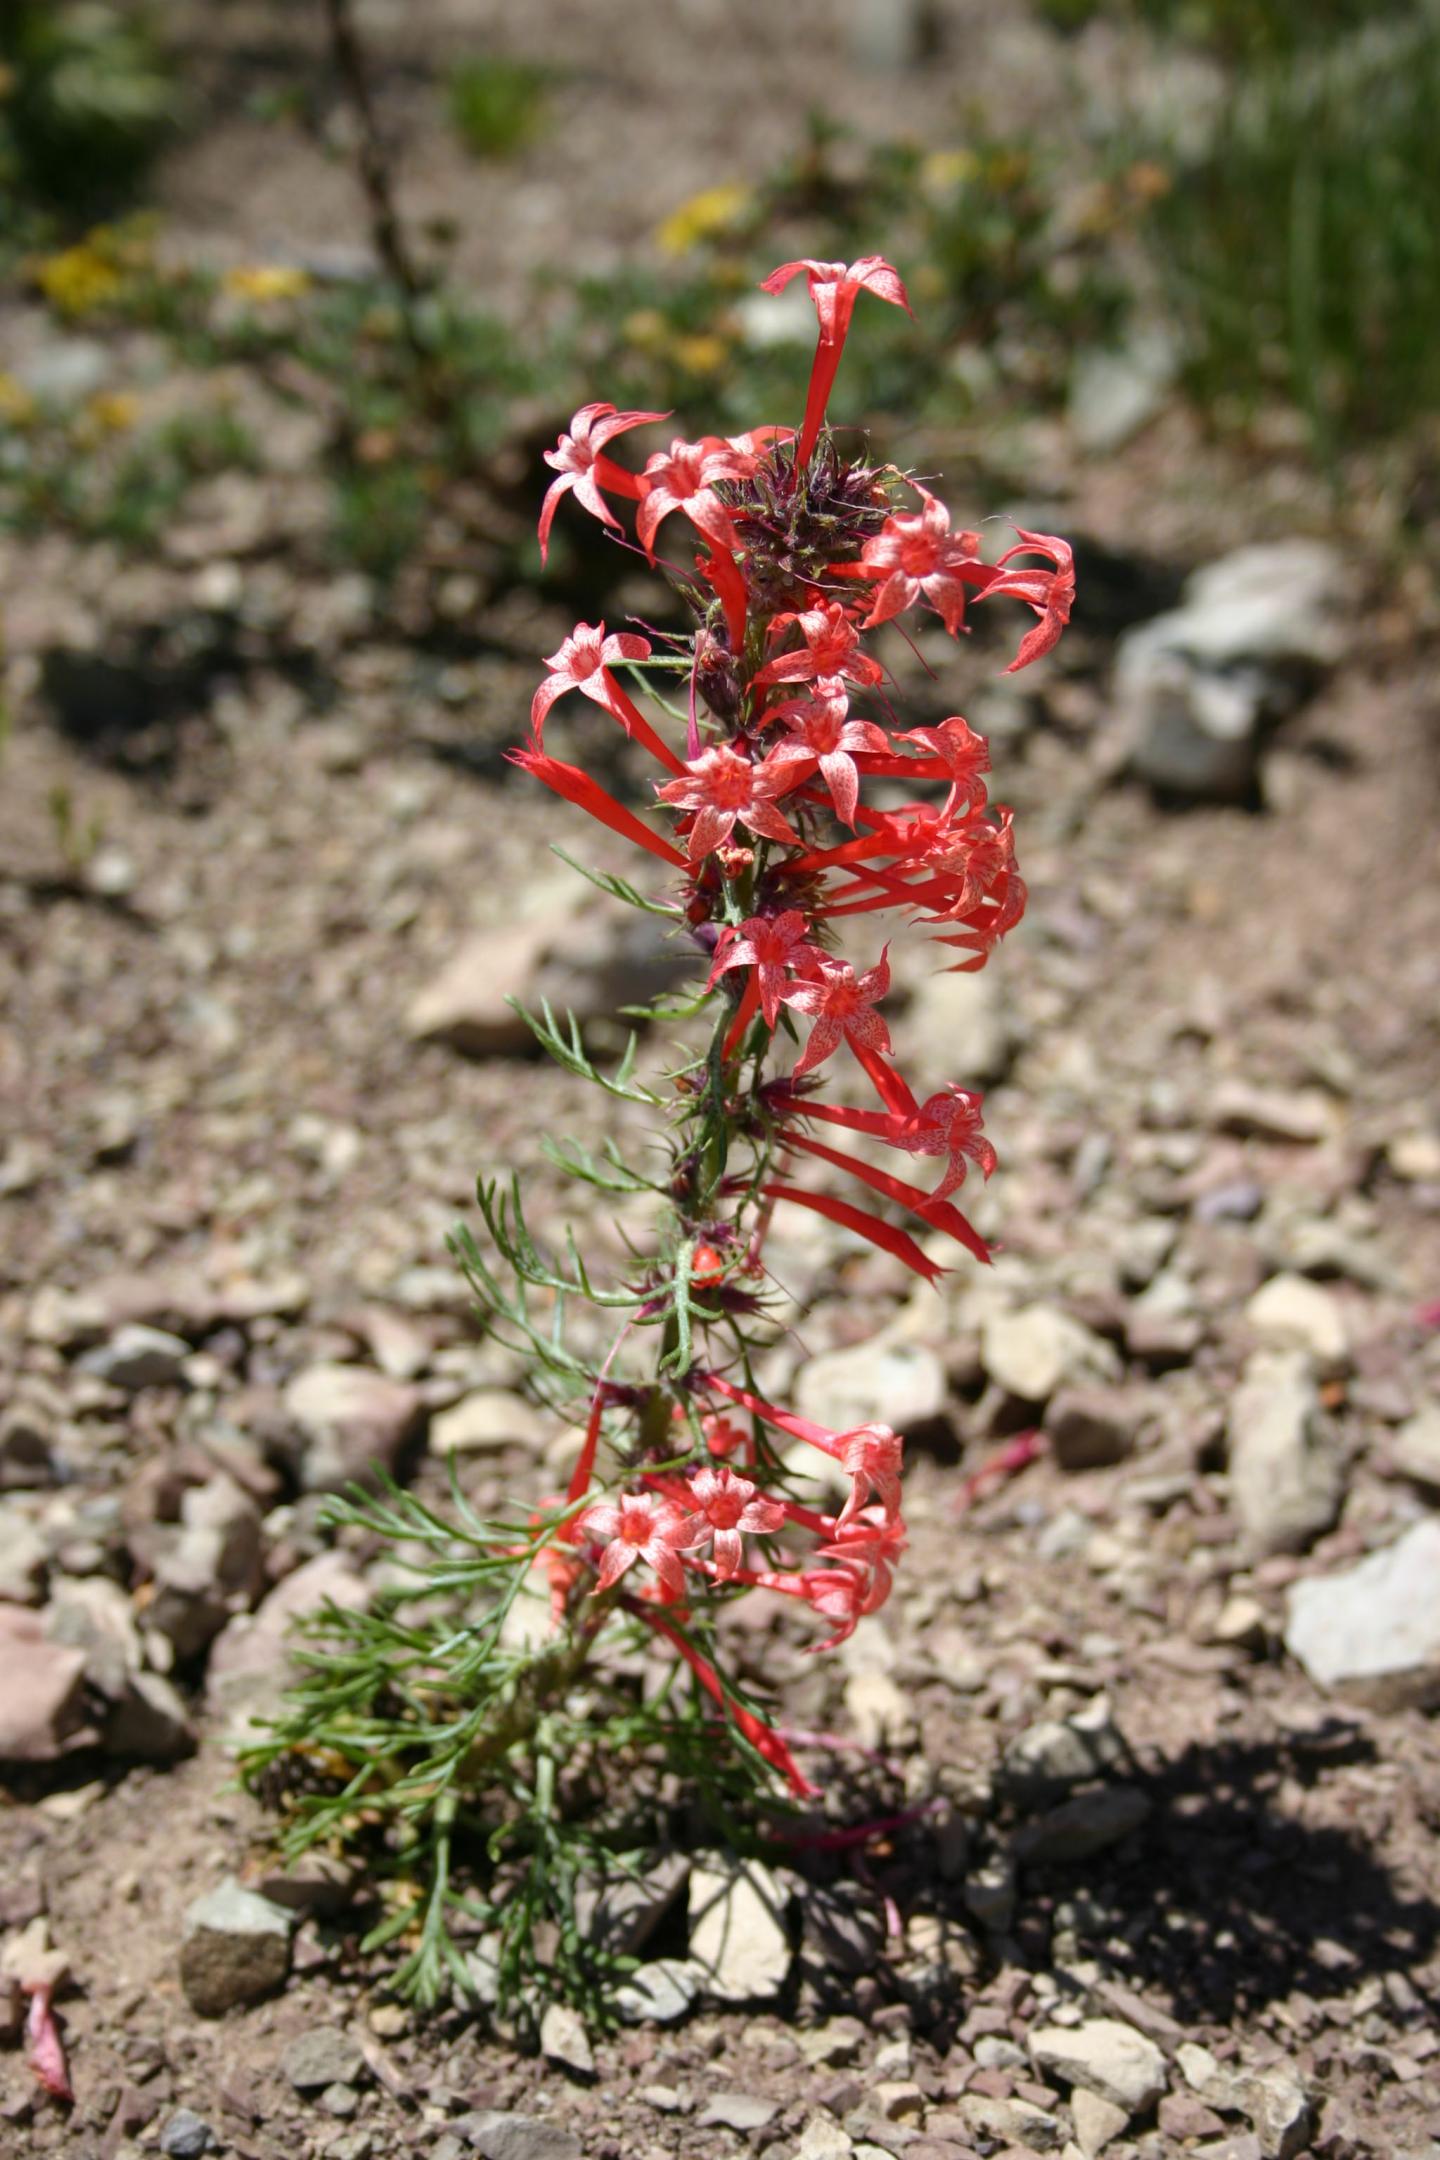 Ipomopsis aggregata plant. This species and a closely related one make fewer seeds in years of early snowmelt.